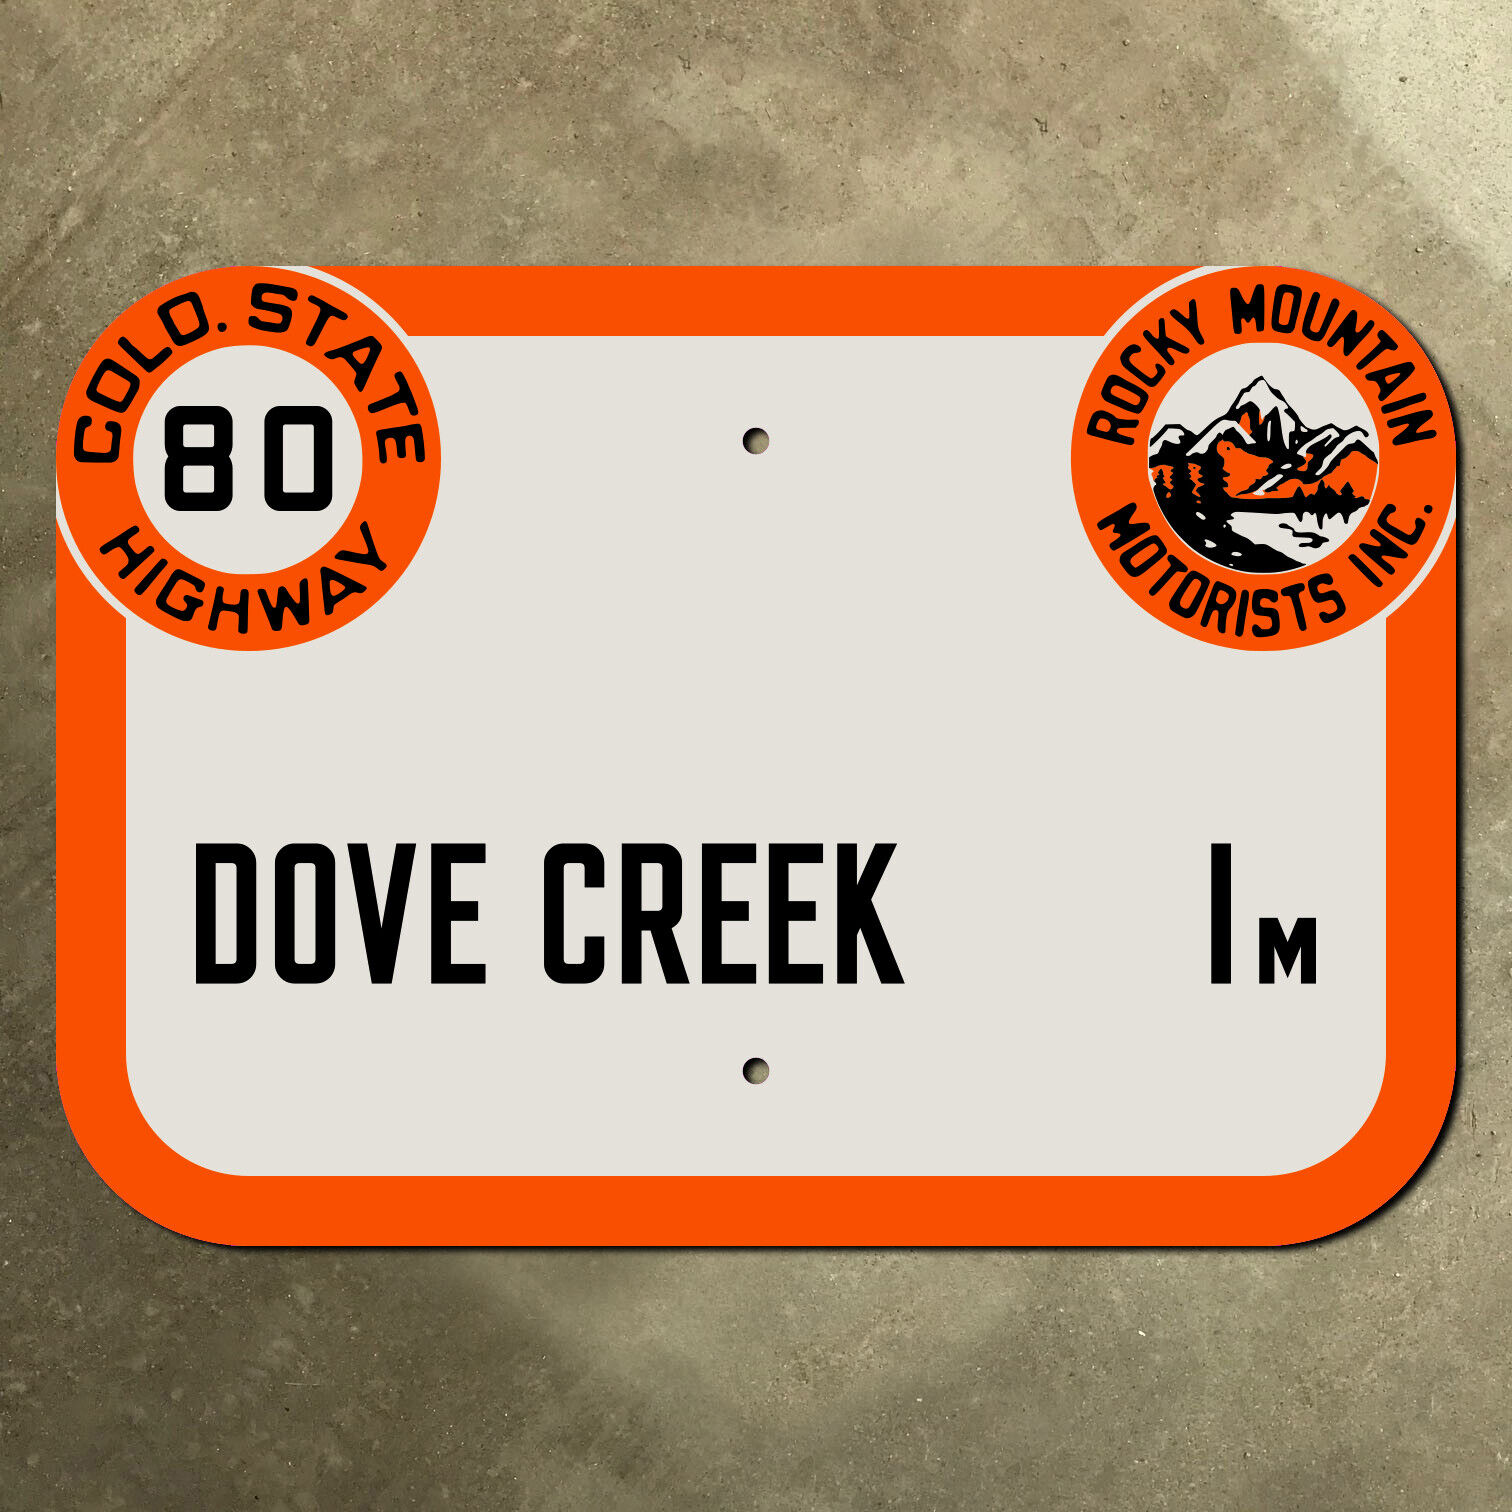 Colorado Rocky Mountain Motorists state highway route 80 Dove Creek road sign